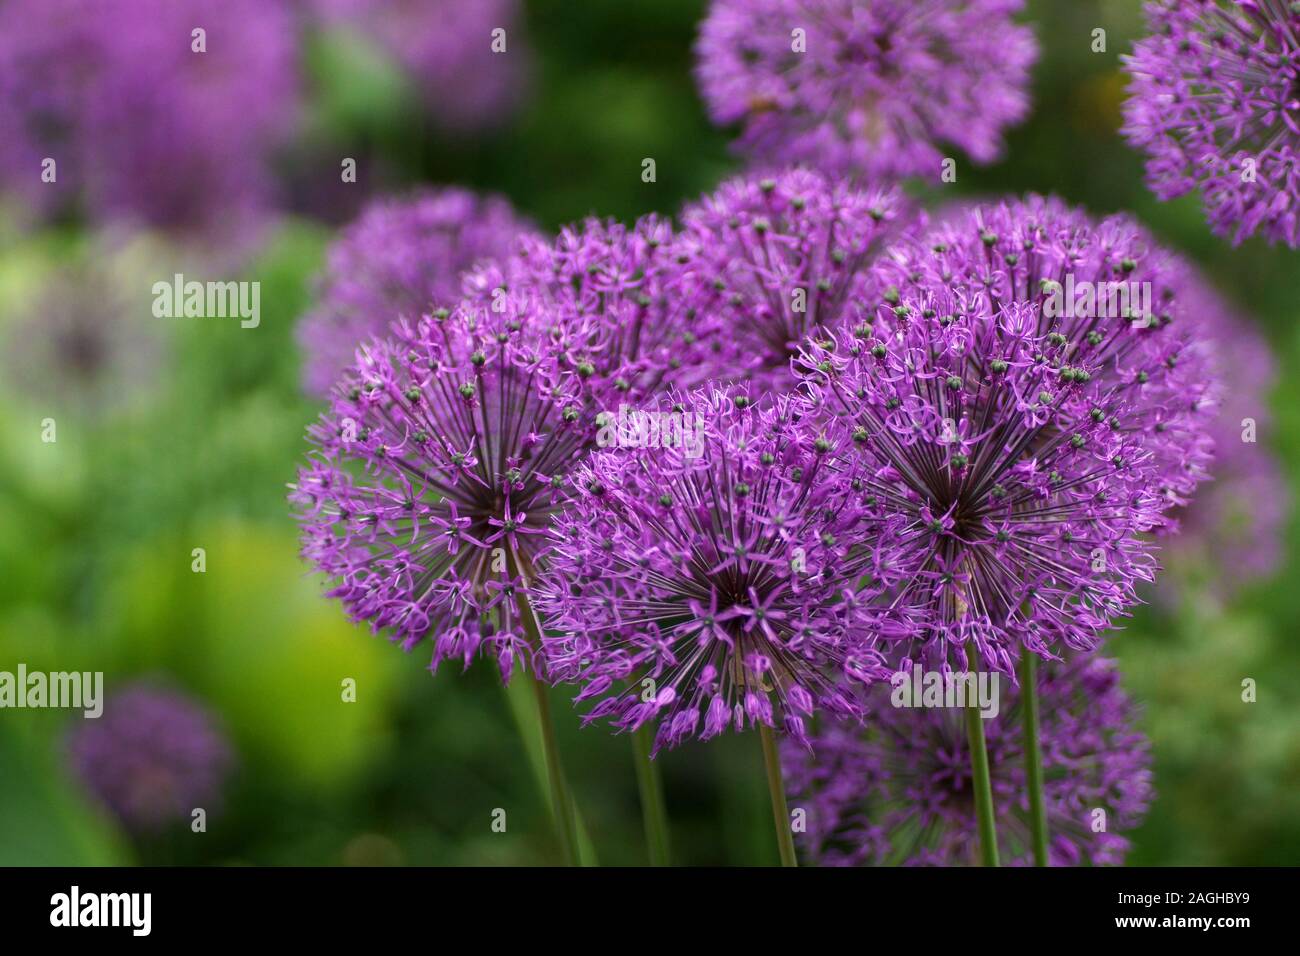 Many round purple onion flowers in the garden. Allium rosenbachianum is a plant species found in the cultivated as an ornamental. Stock Photo